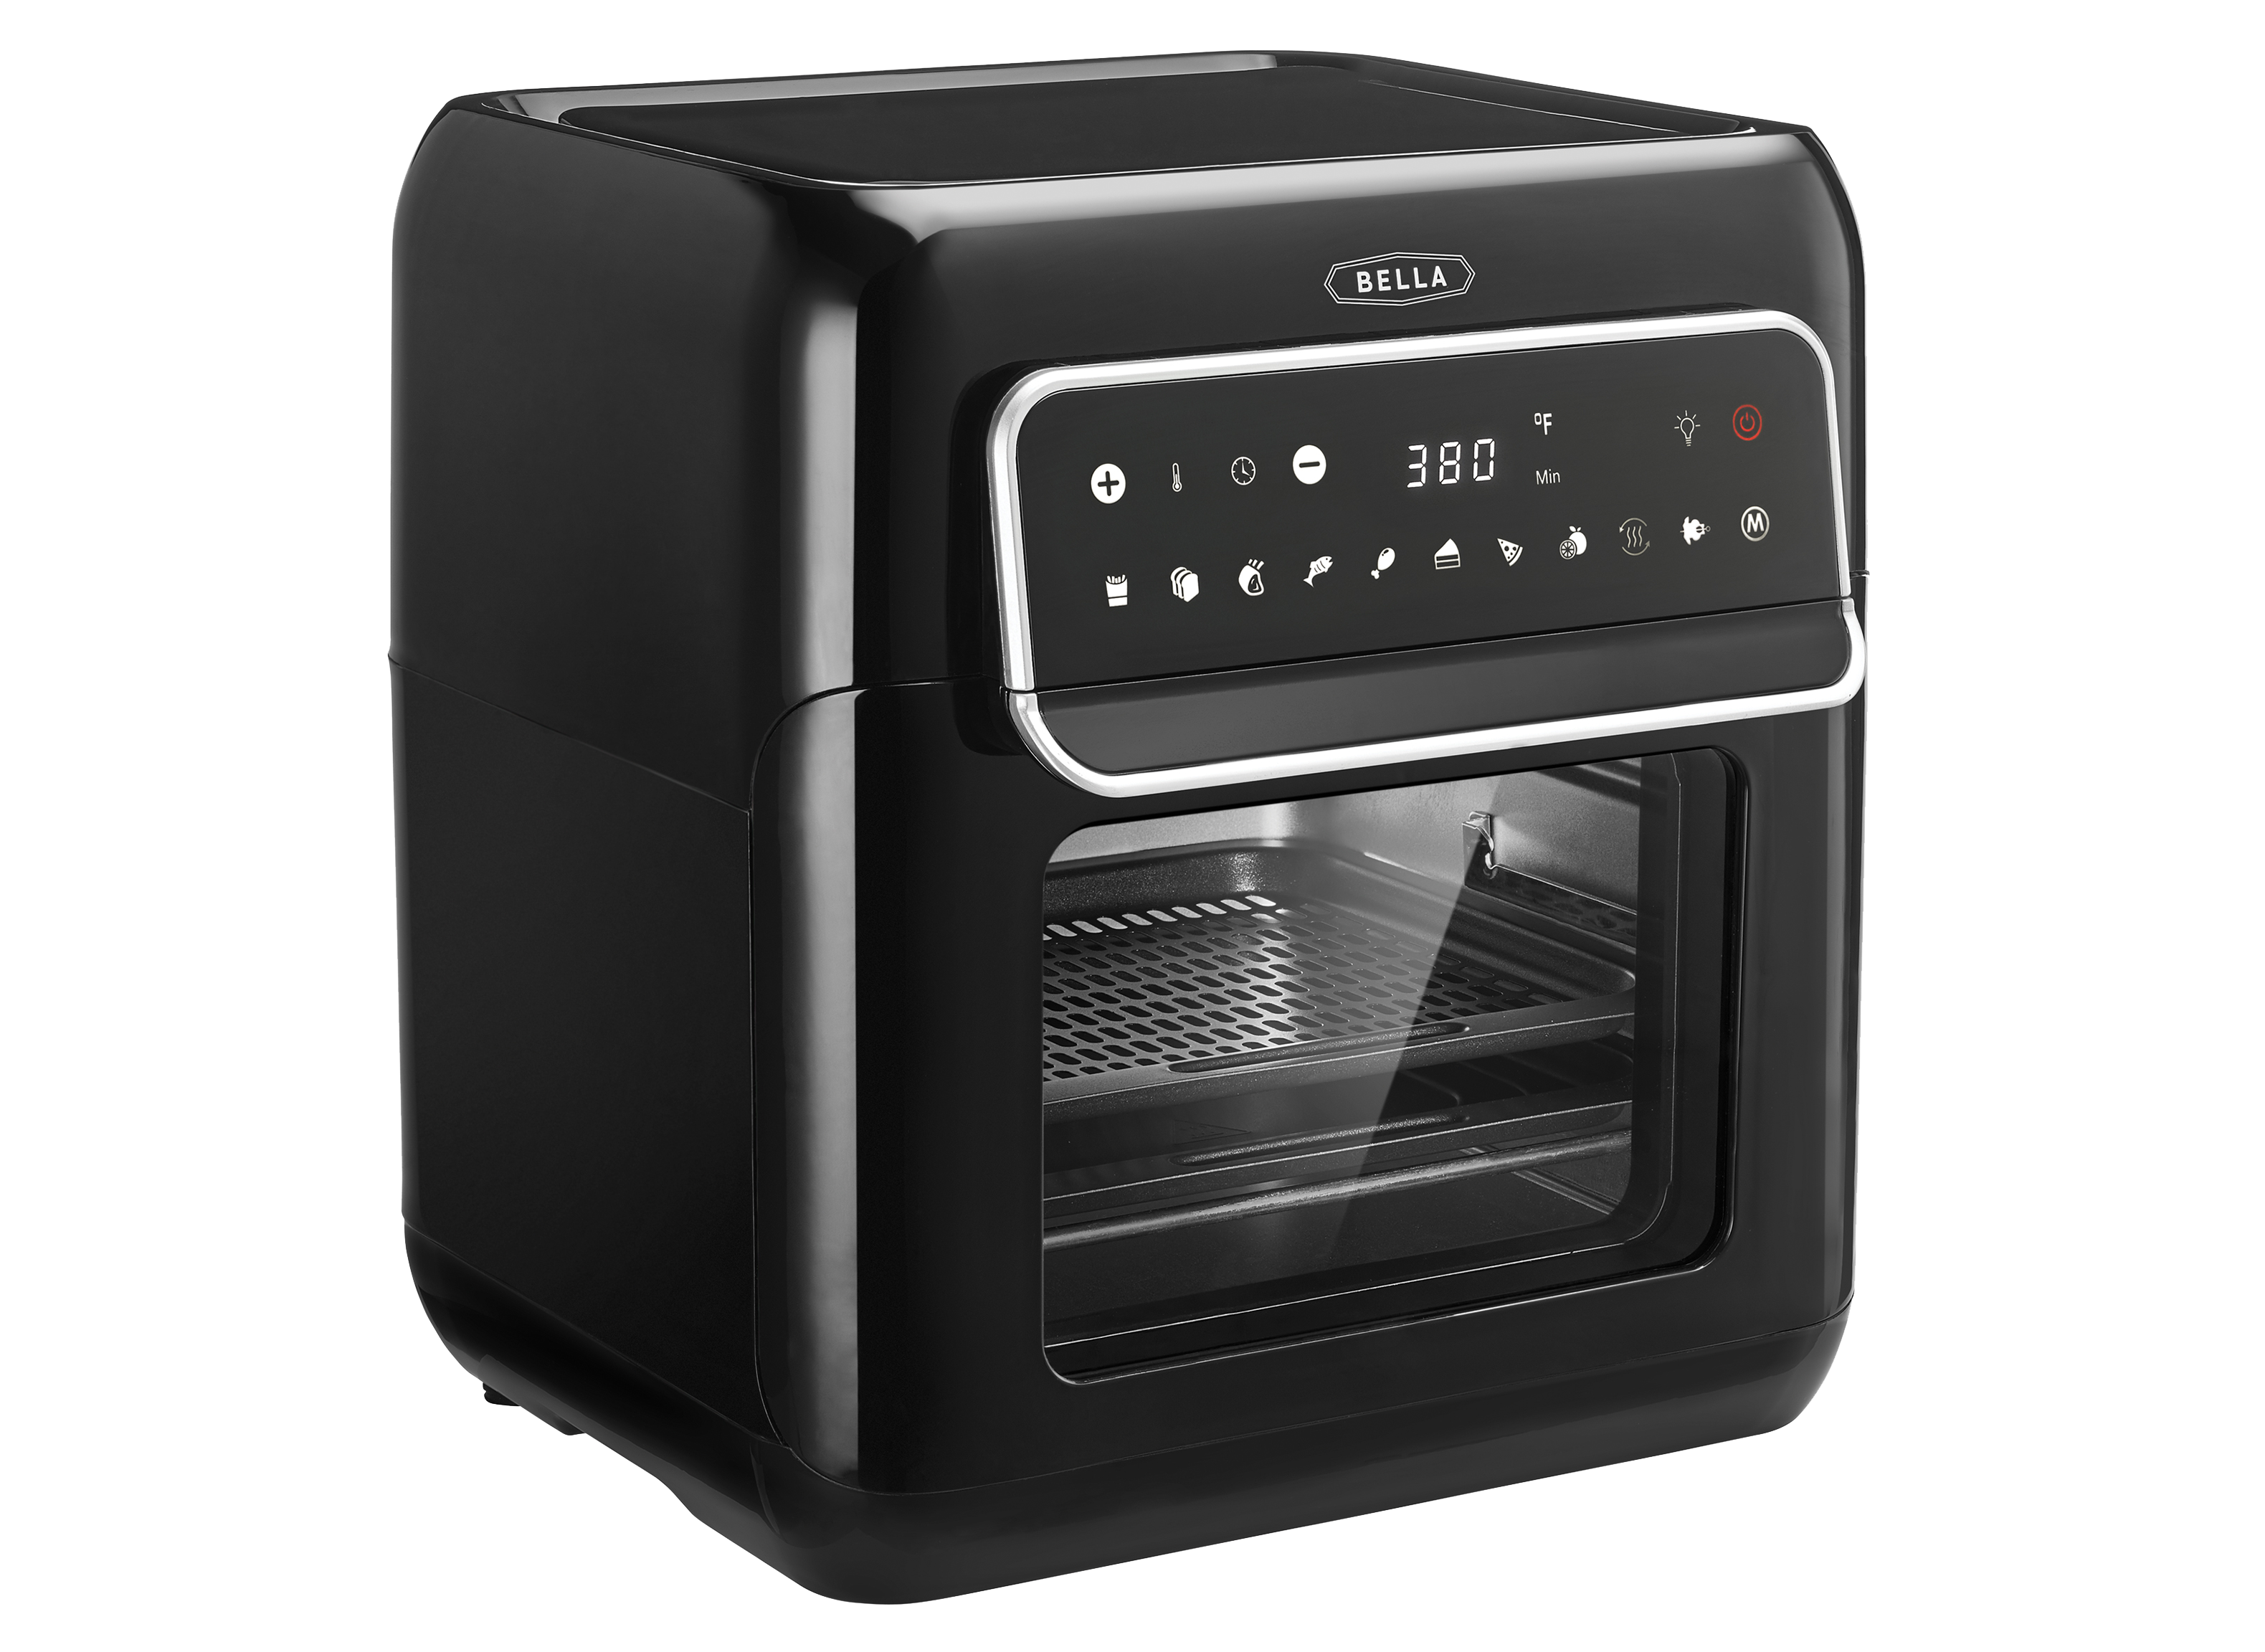 https://crdms.images.consumerreports.org/prod/products/cr/models/398535-toaster-ovens-bella-air-convection-fryer-oven-dehydrator-14754-10004873.png